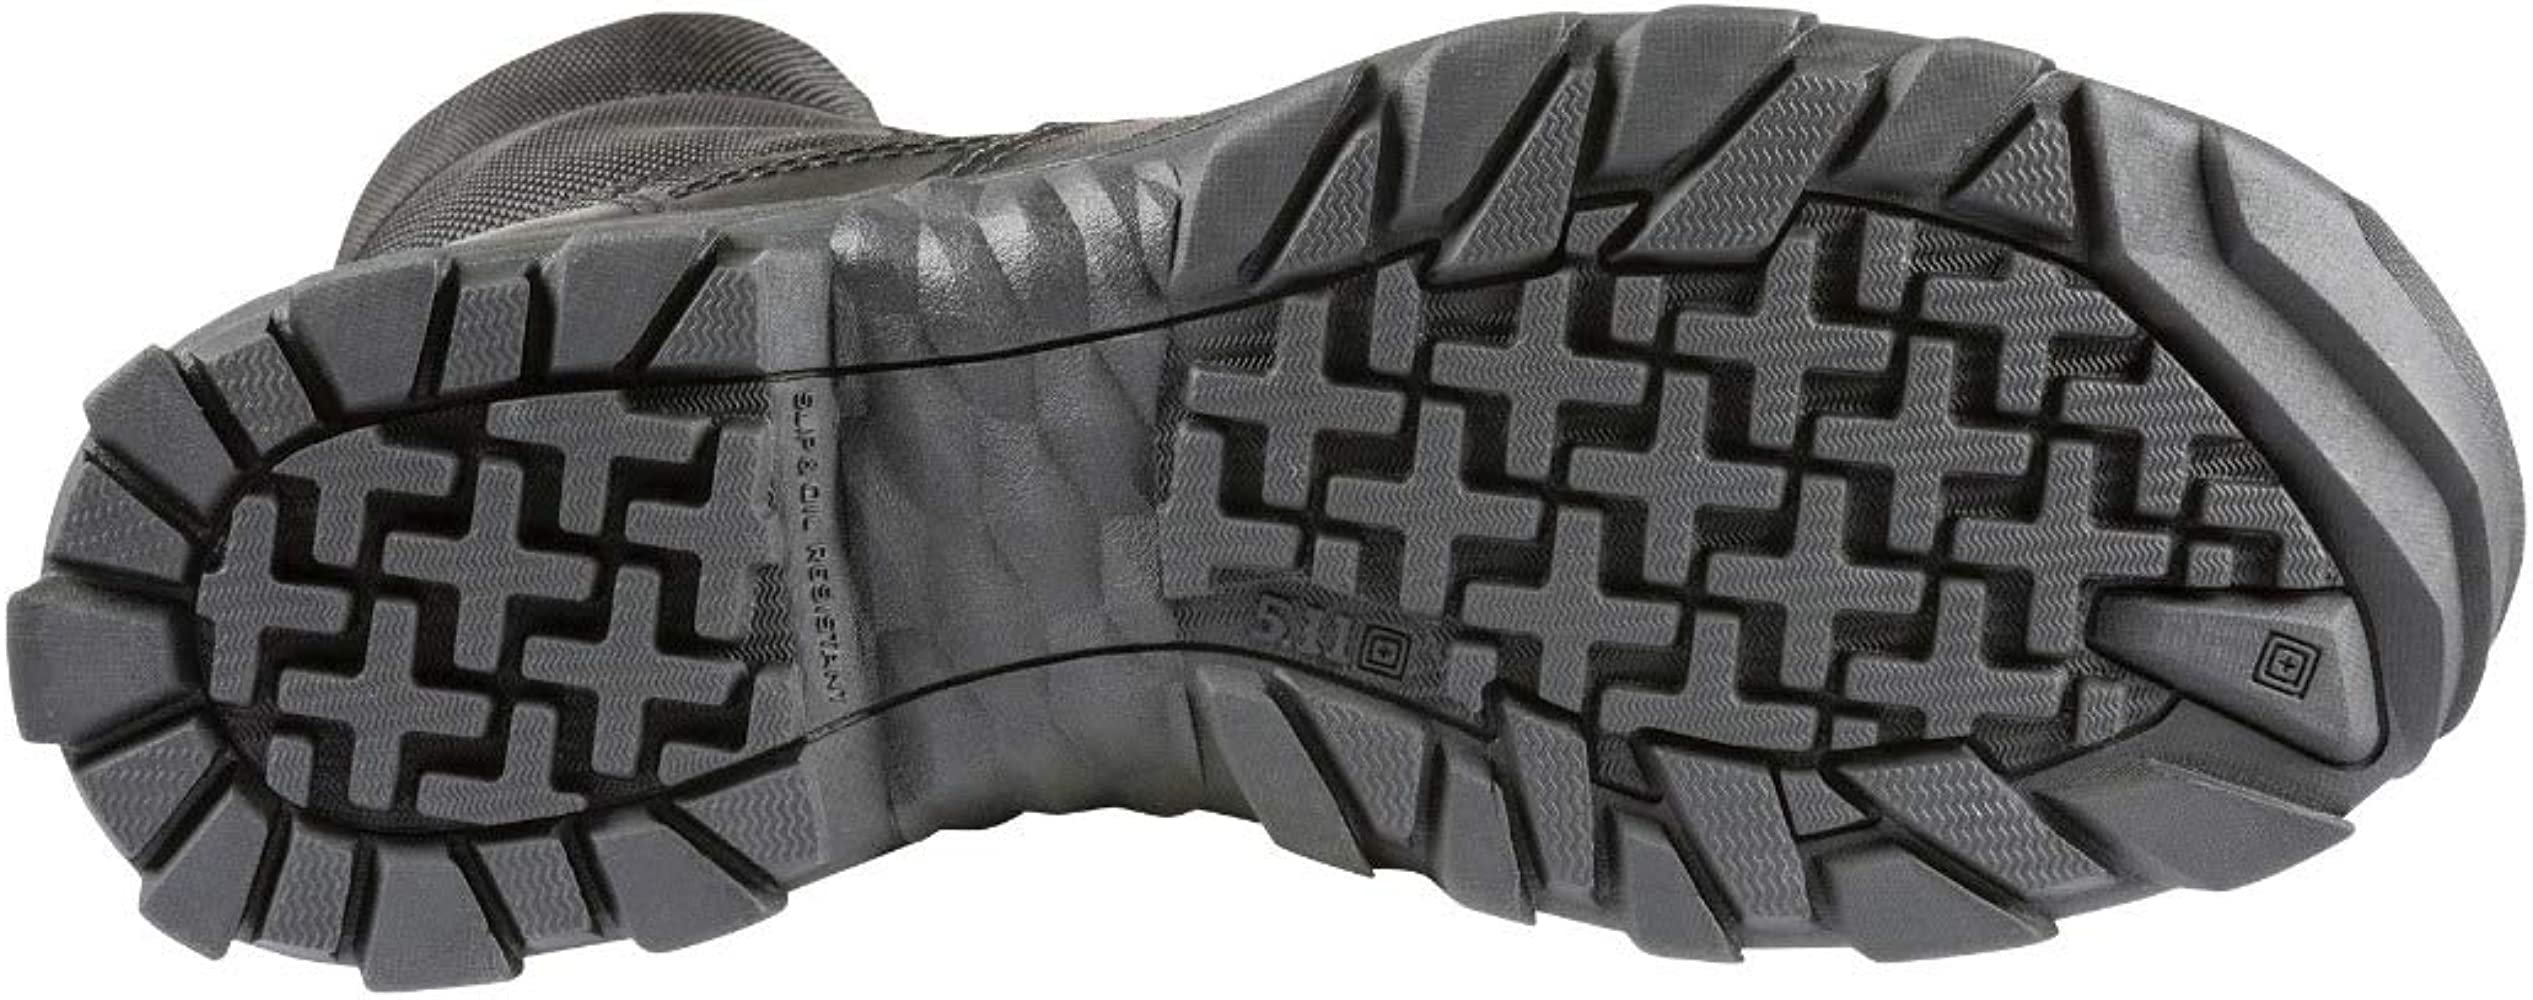 5.11 Work Gear Men's Speed 3.0 Urban Sidezip Boot, Ortholite Insole, Moisture Wicking, Black, 12 Wide, Style 12336 - image 5 of 6